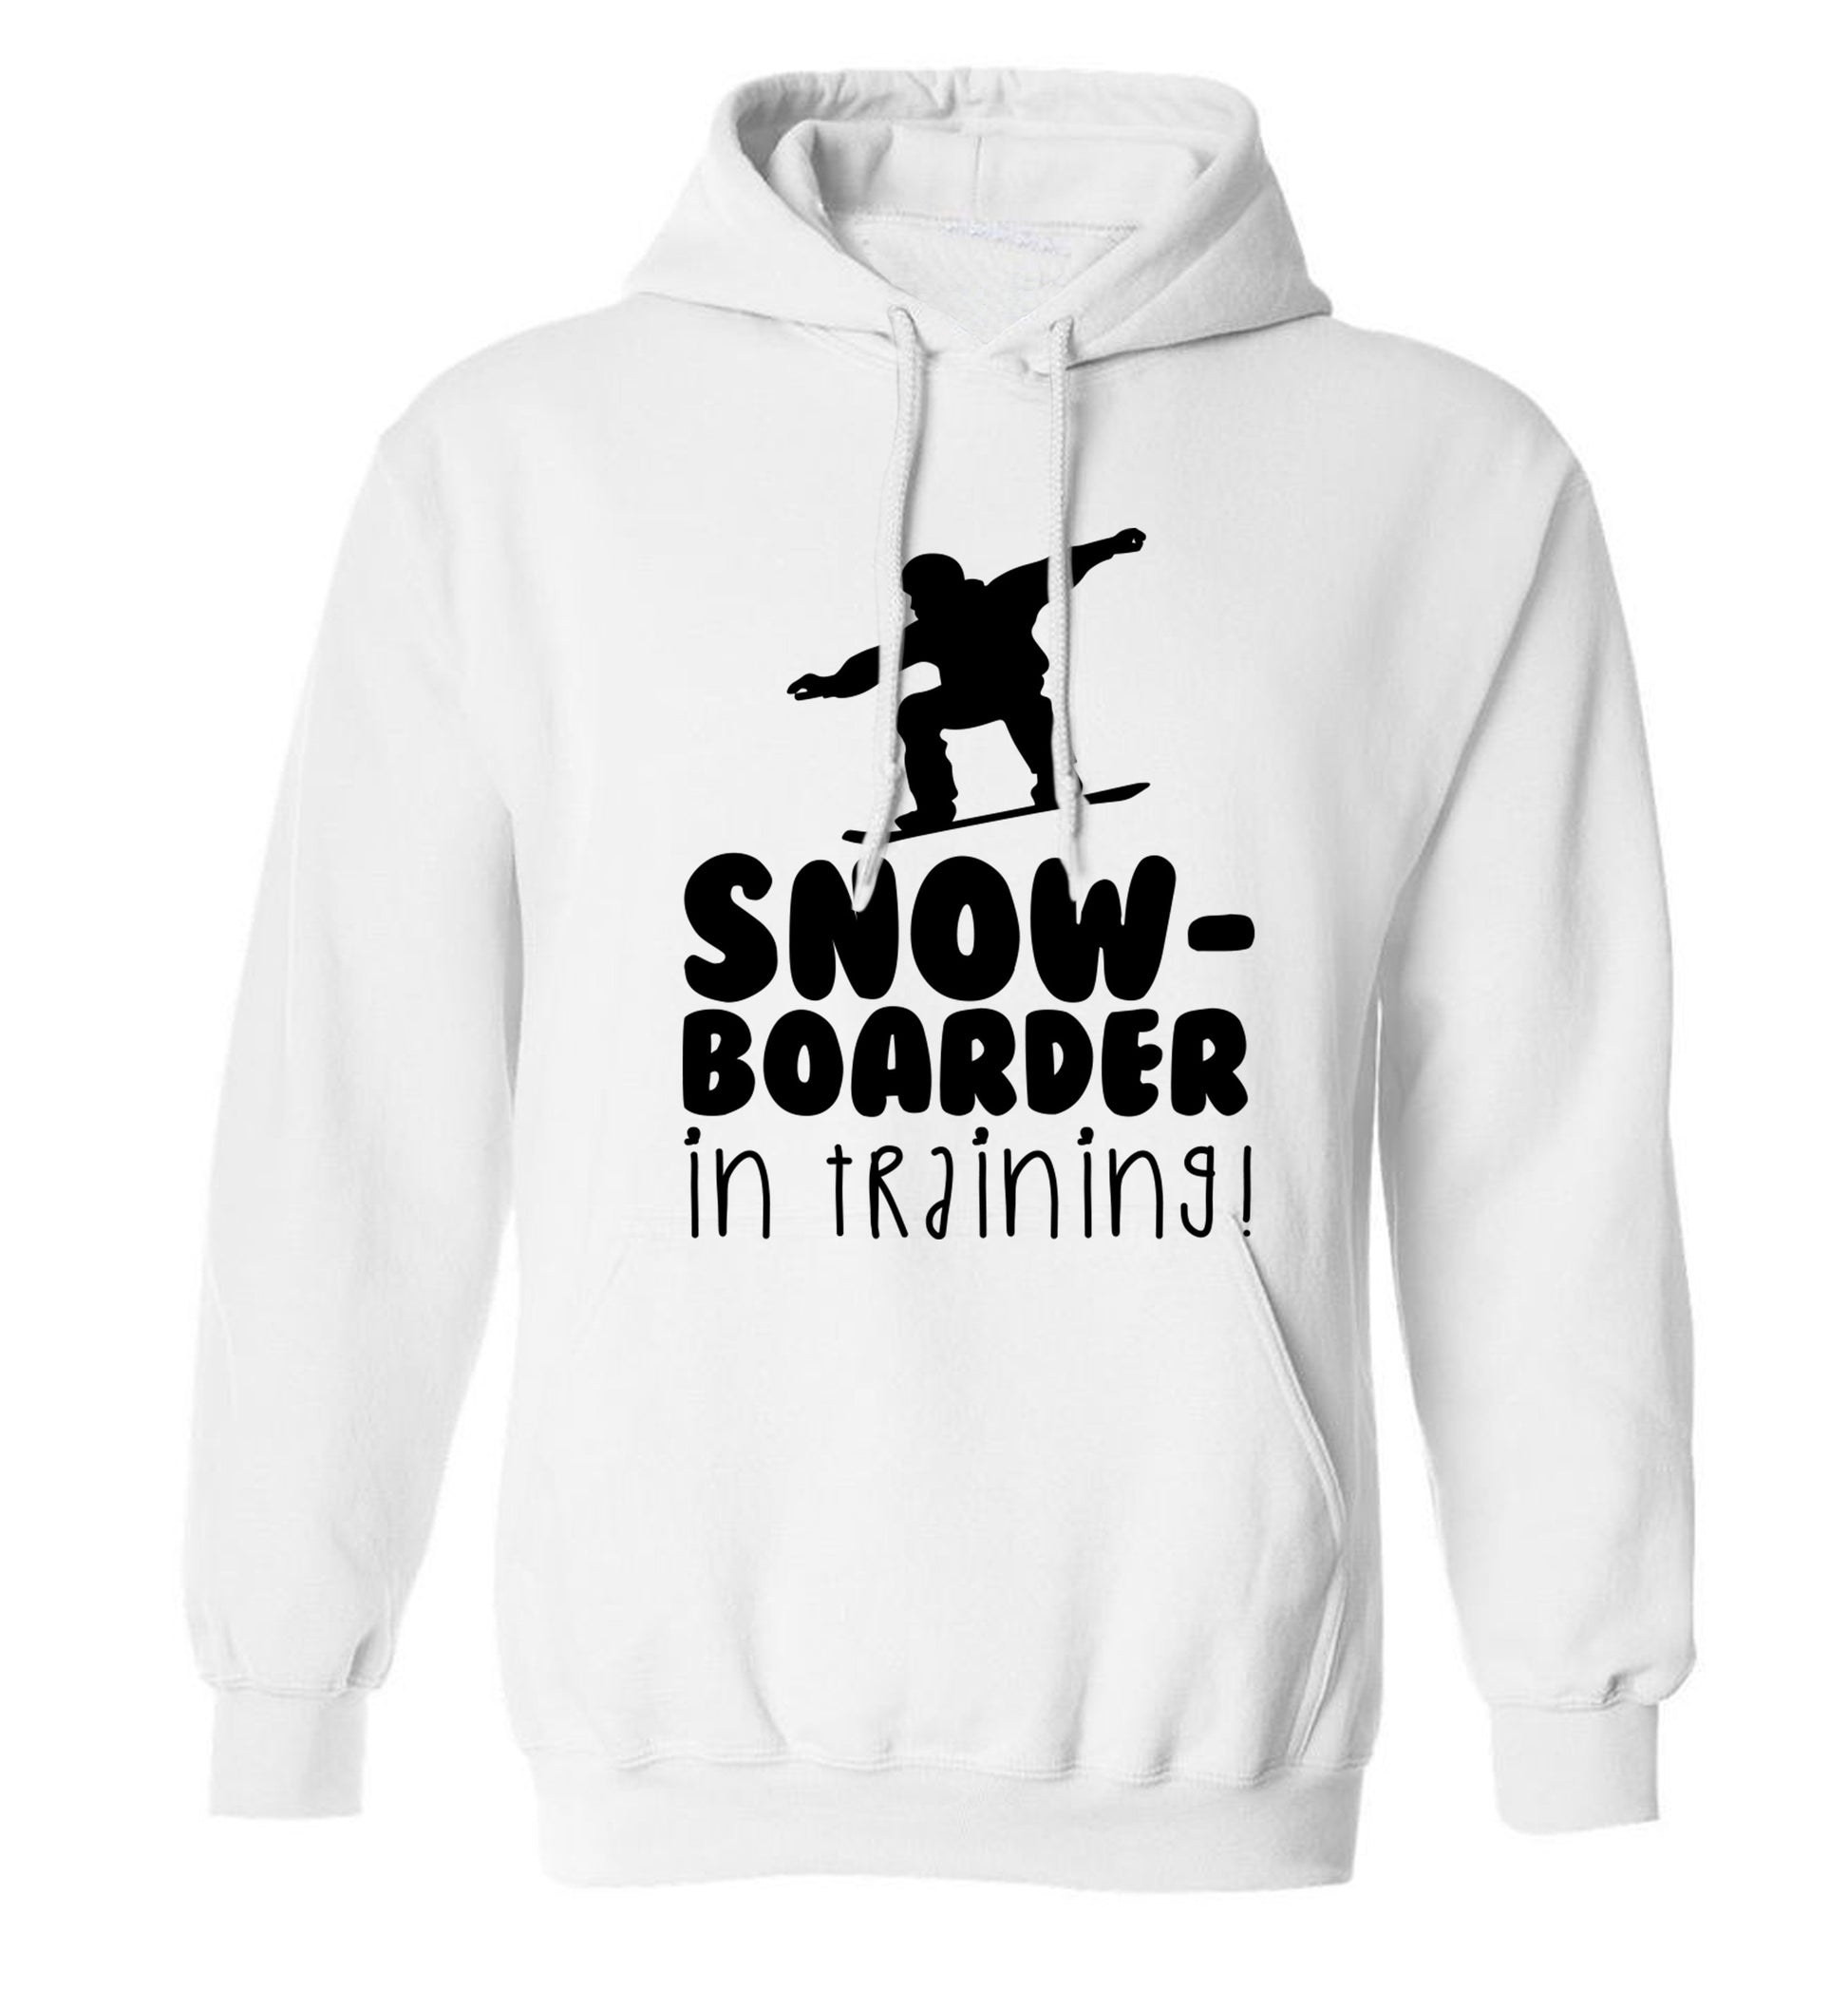 Snowboarder in training adults unisex white hoodie 2XL